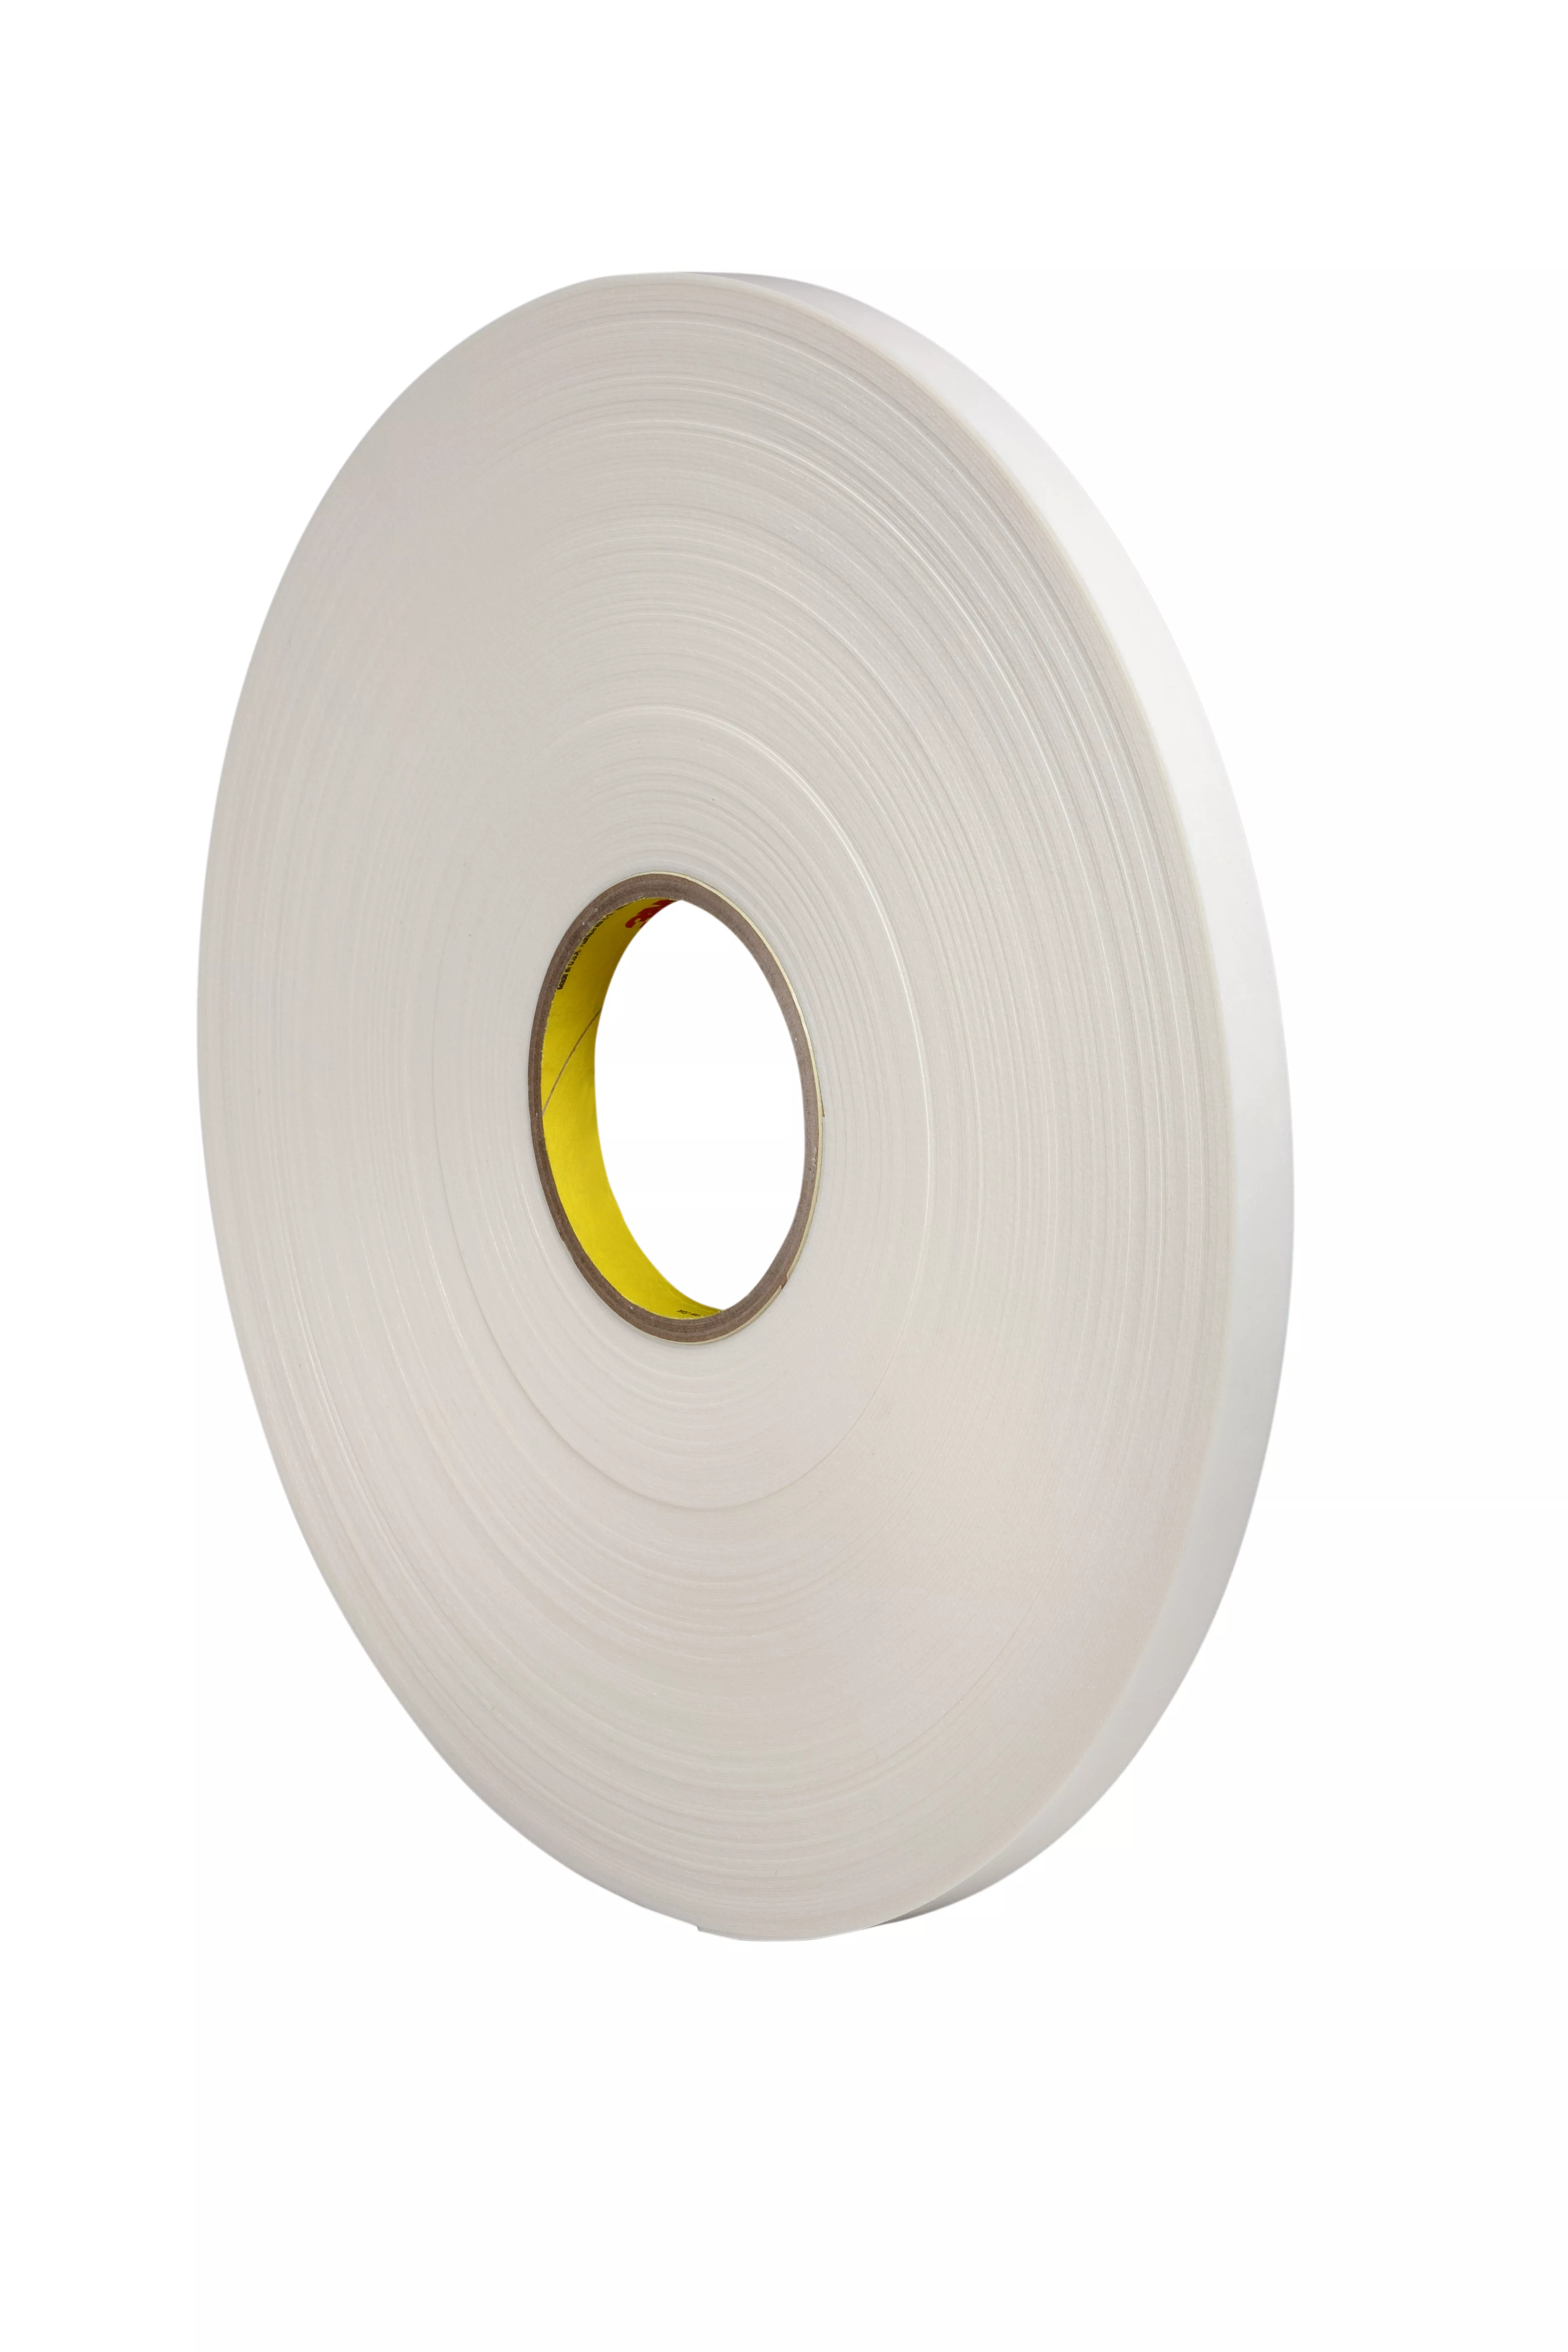 3M™ Urethane Foam Tape 4108, Natural, 1/2 in x 36 yd, 125 mil, 18
Roll/Case